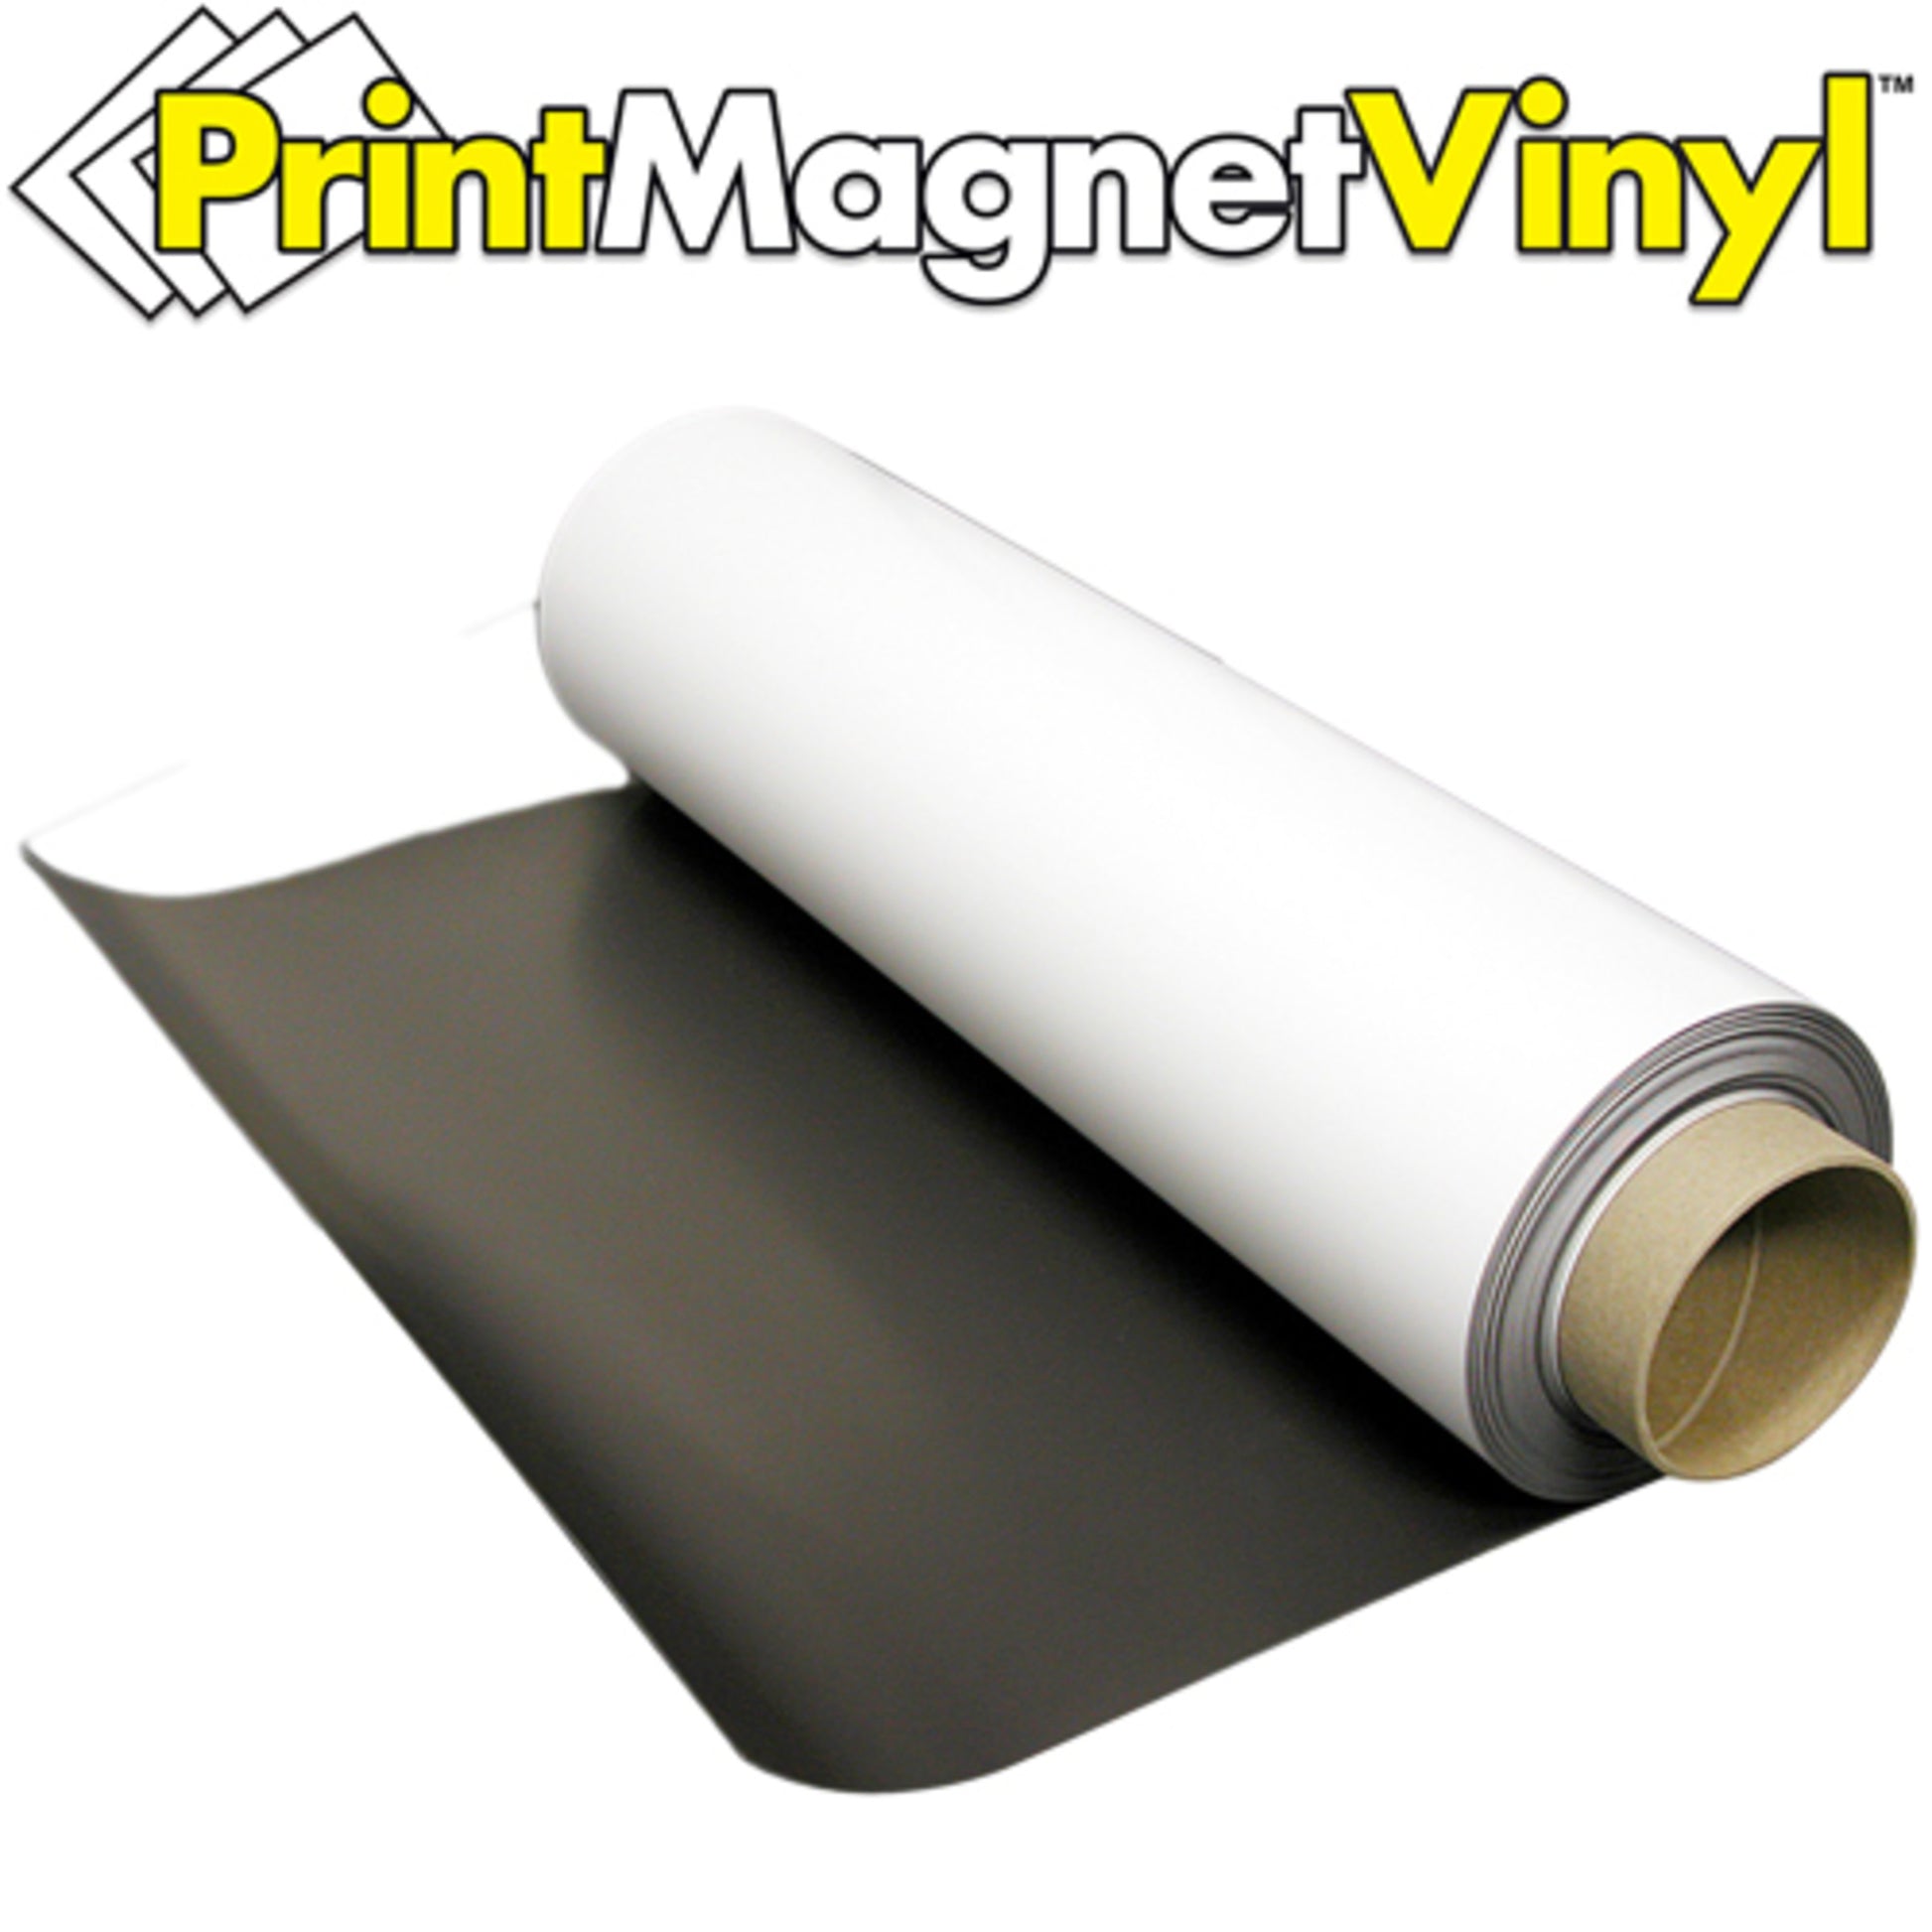 Load image into Gallery viewer, ZG1524GW50F PrintMagnetVinyl™ Flexible Magnetic Sheet - In Use